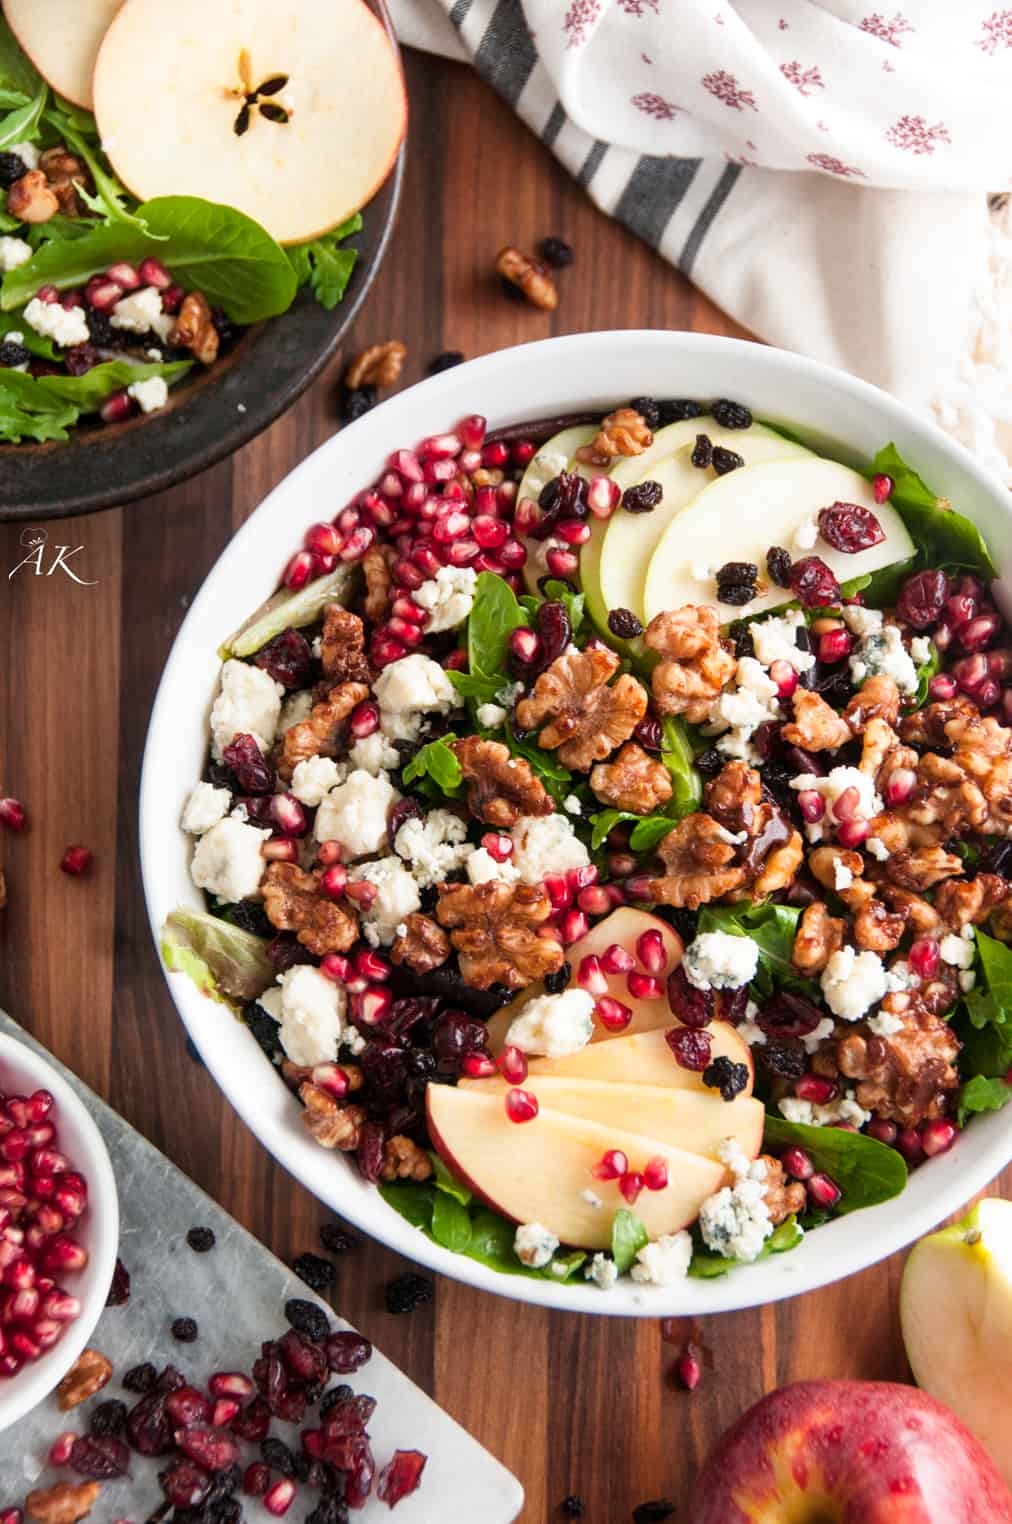 Autumn Apple and Pomegranate Salad with Homemade Candied Walnuts and Bleu Cheese